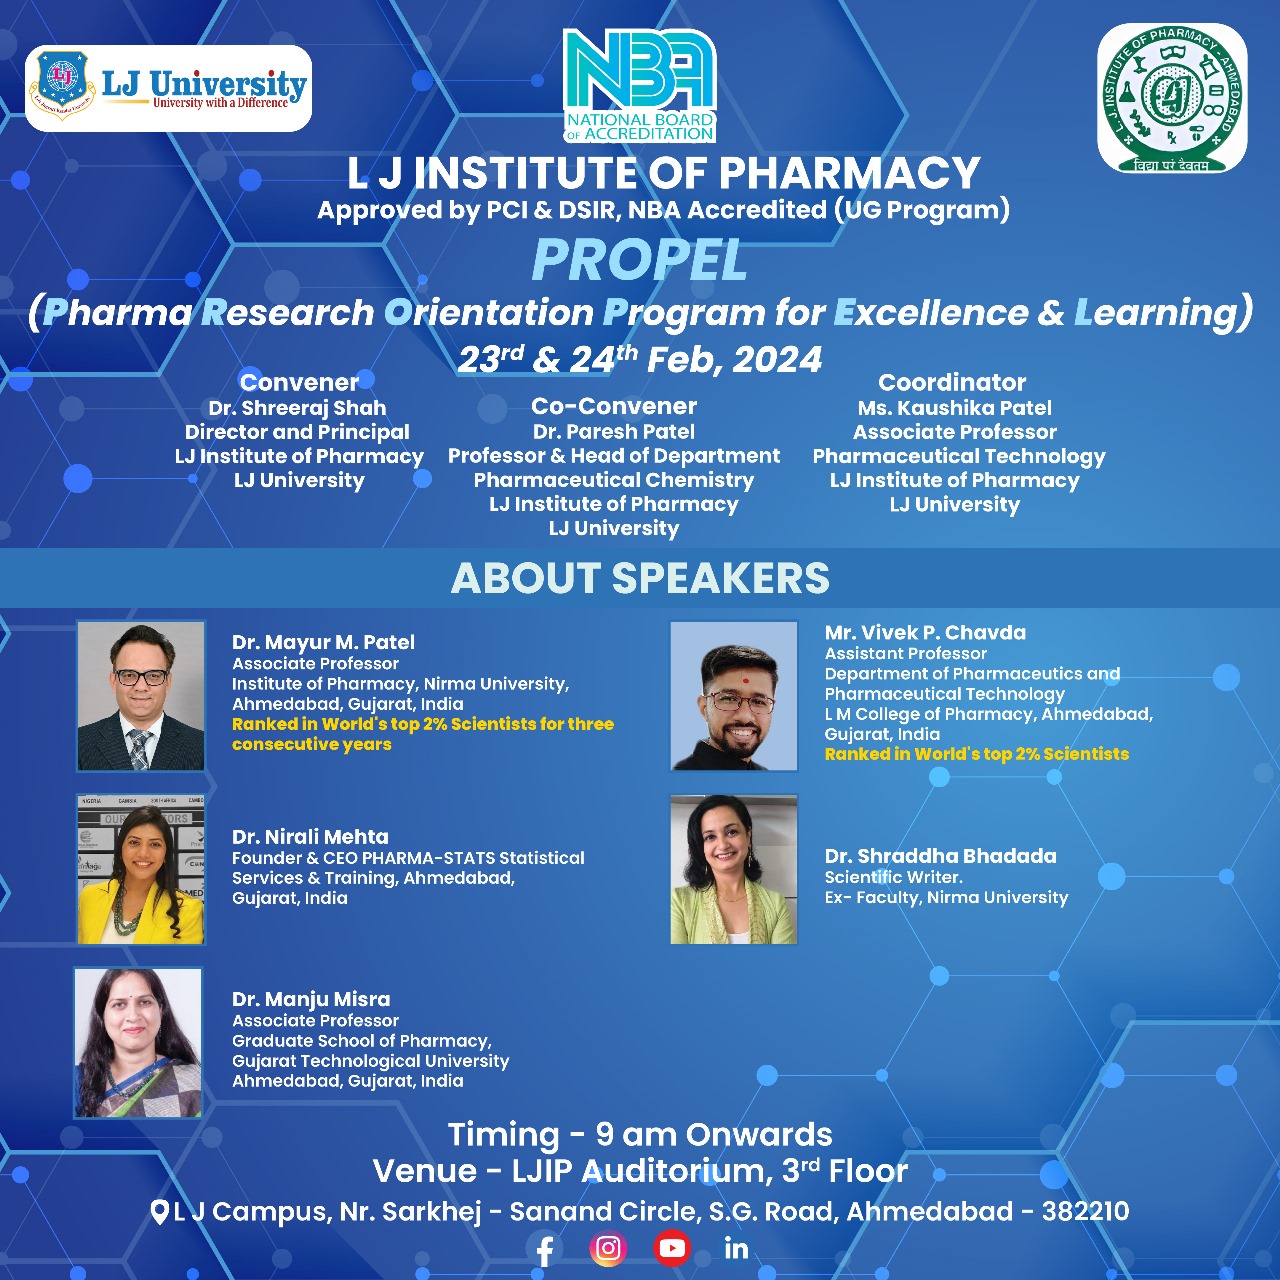 Propel: Pharma Research Orientation Program for Excellence & Learning